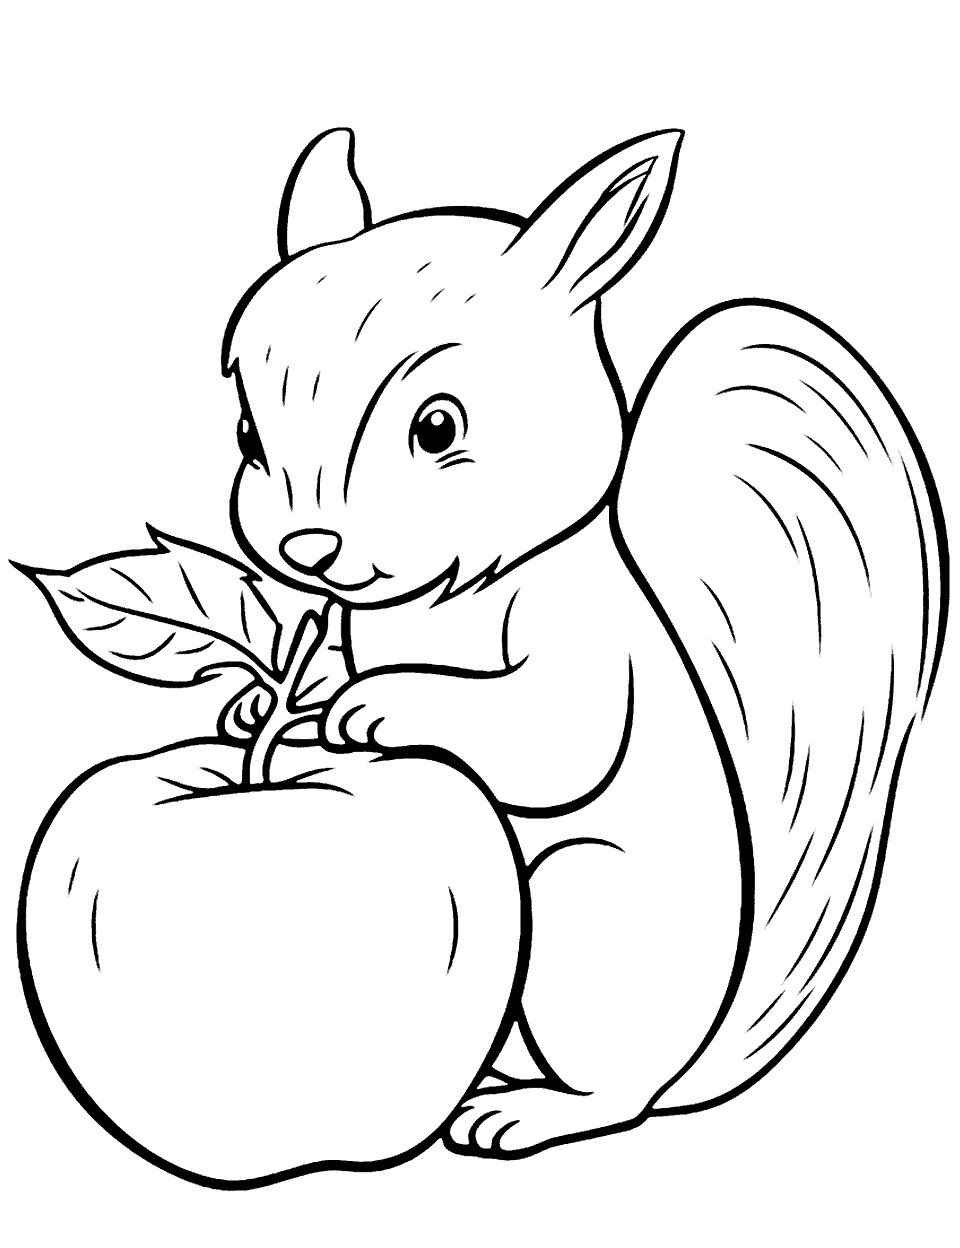 Squirrel Holding an Apple Coloring Page - A squirrel holding a small apple in its paws.